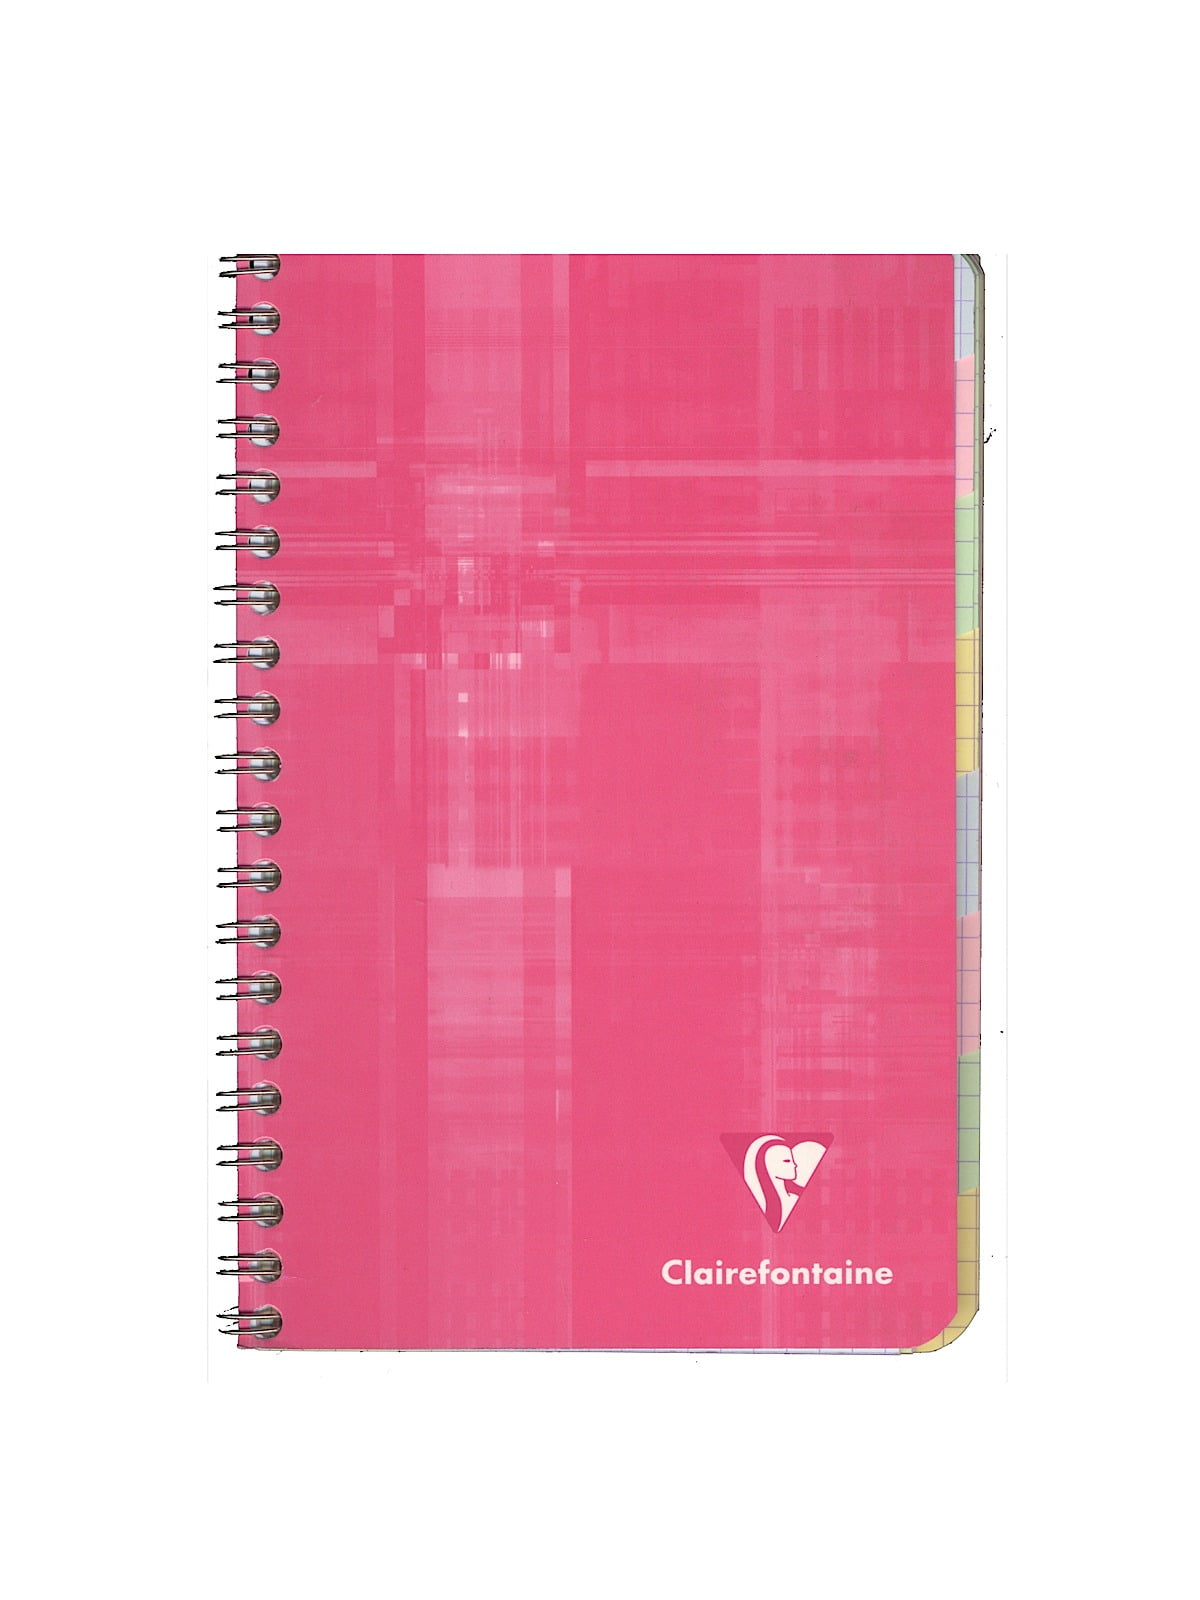 Clairefontaine Wirebound Notebook 6 3/4 x 8 3/4 Assorted Cover Color Chosen at Random Graph w/12 tabs 60 sheets Sold Individually 